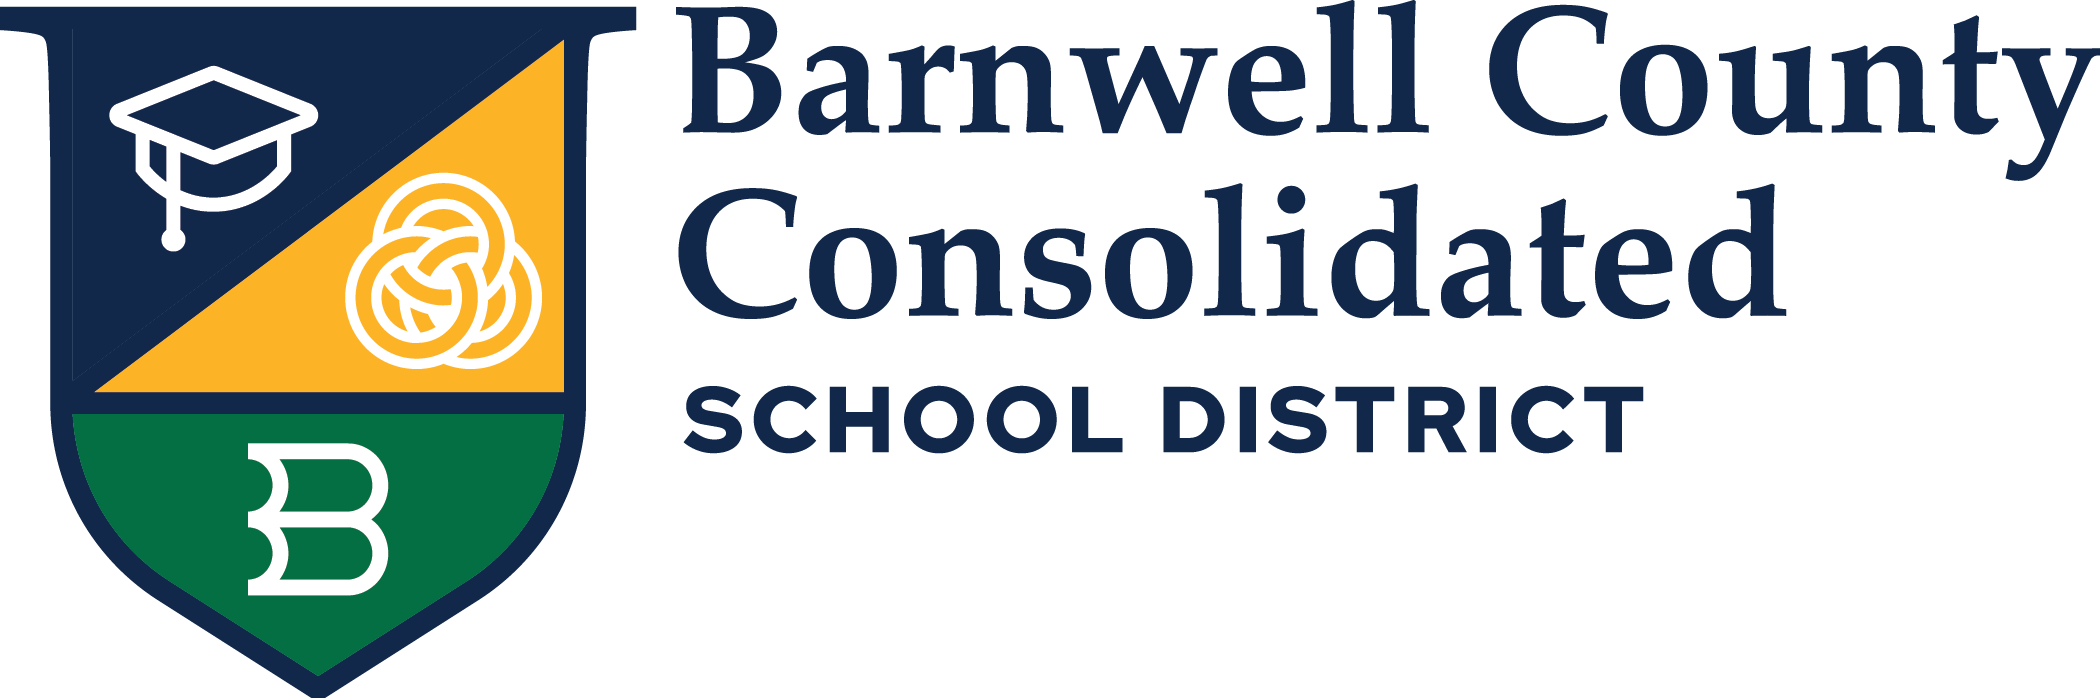 Barnwell County Consolidated School District • Pierce Group Benefits